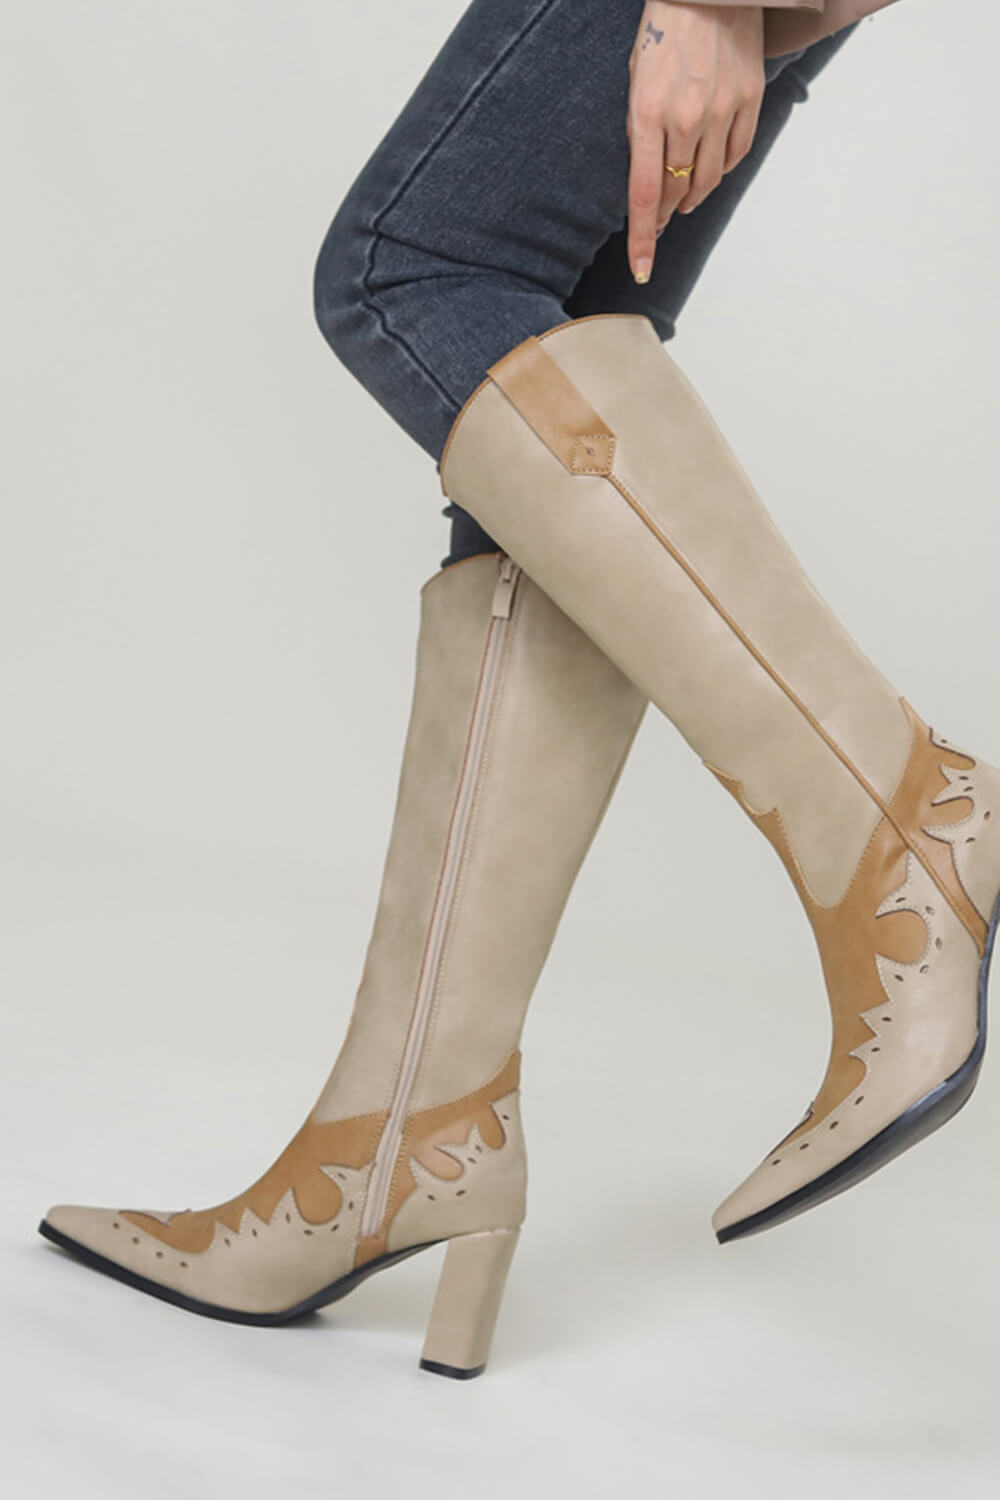 Contrast Western Cowboy Pointed Toe Block Heeled Knee High Boots - Brown White